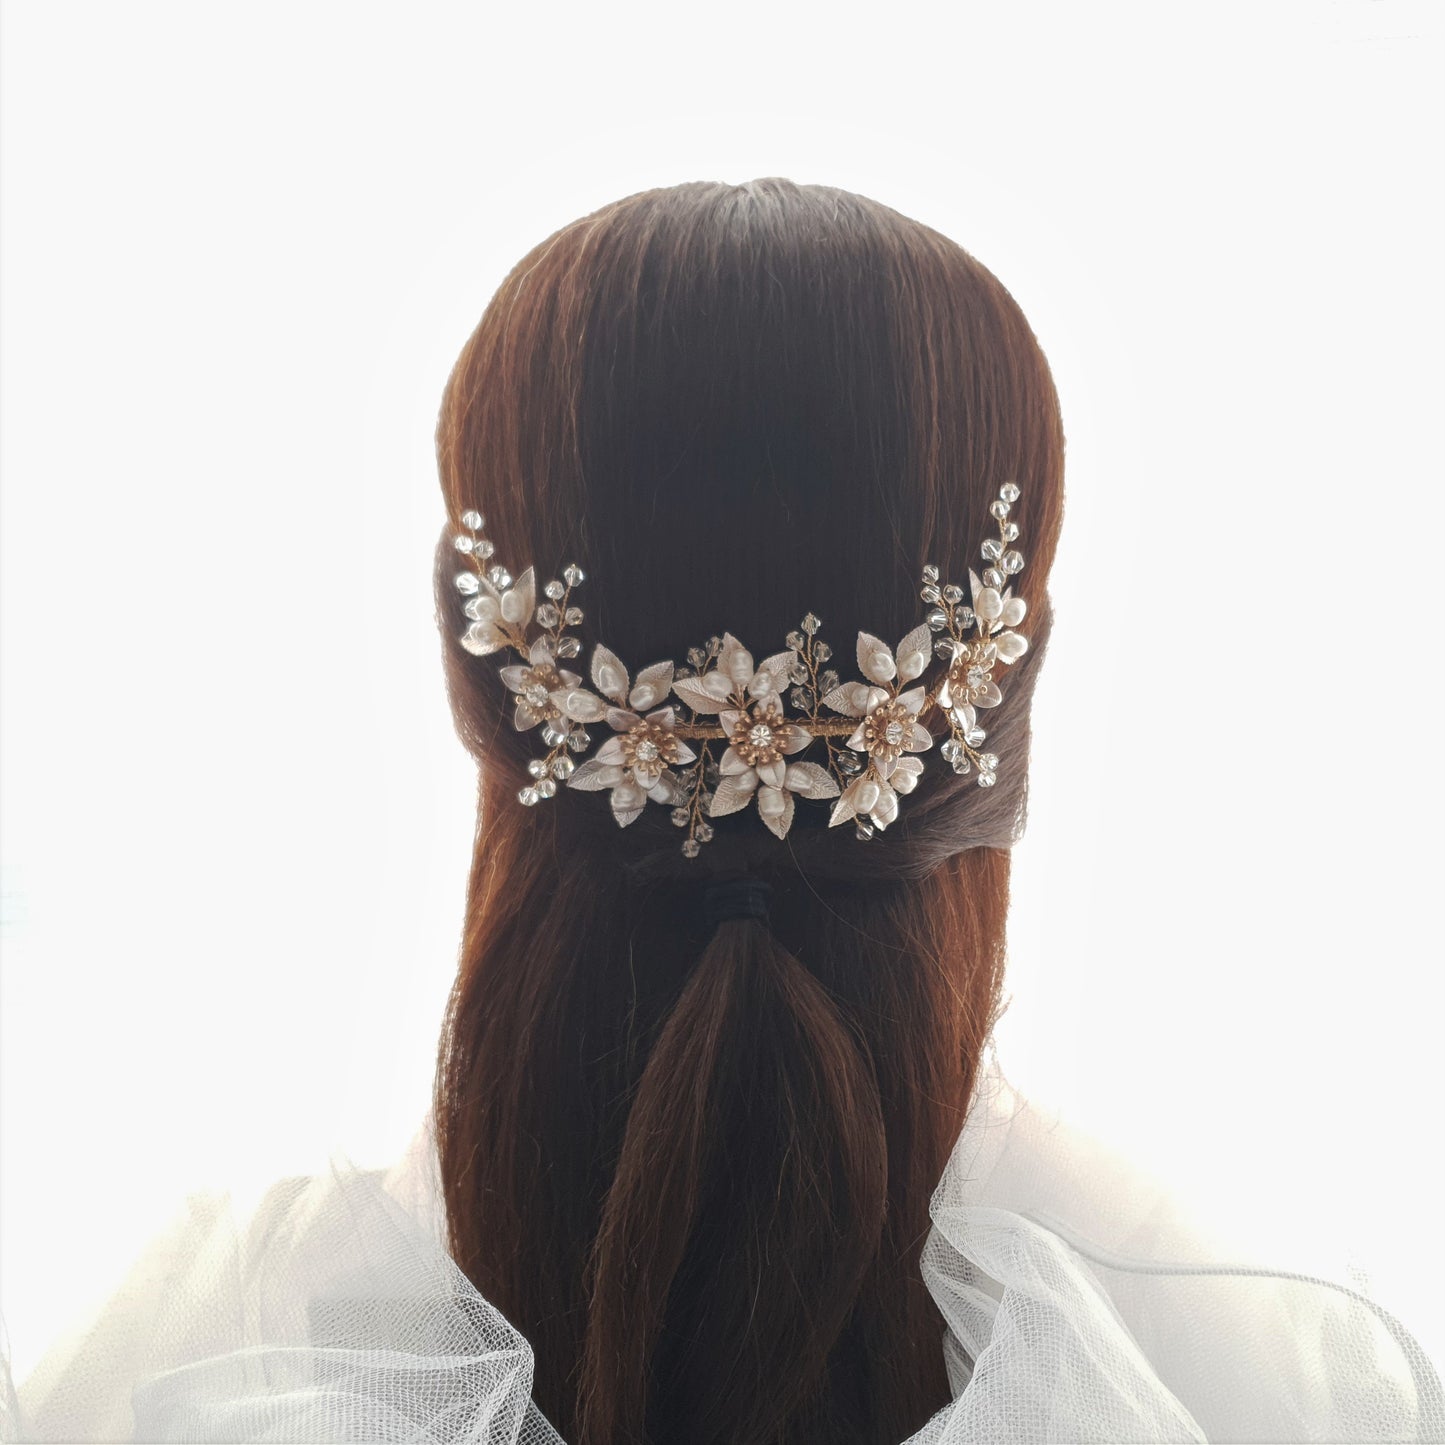 Statement Bridal Hair Comb With Gold leaves and Flowers-Liana